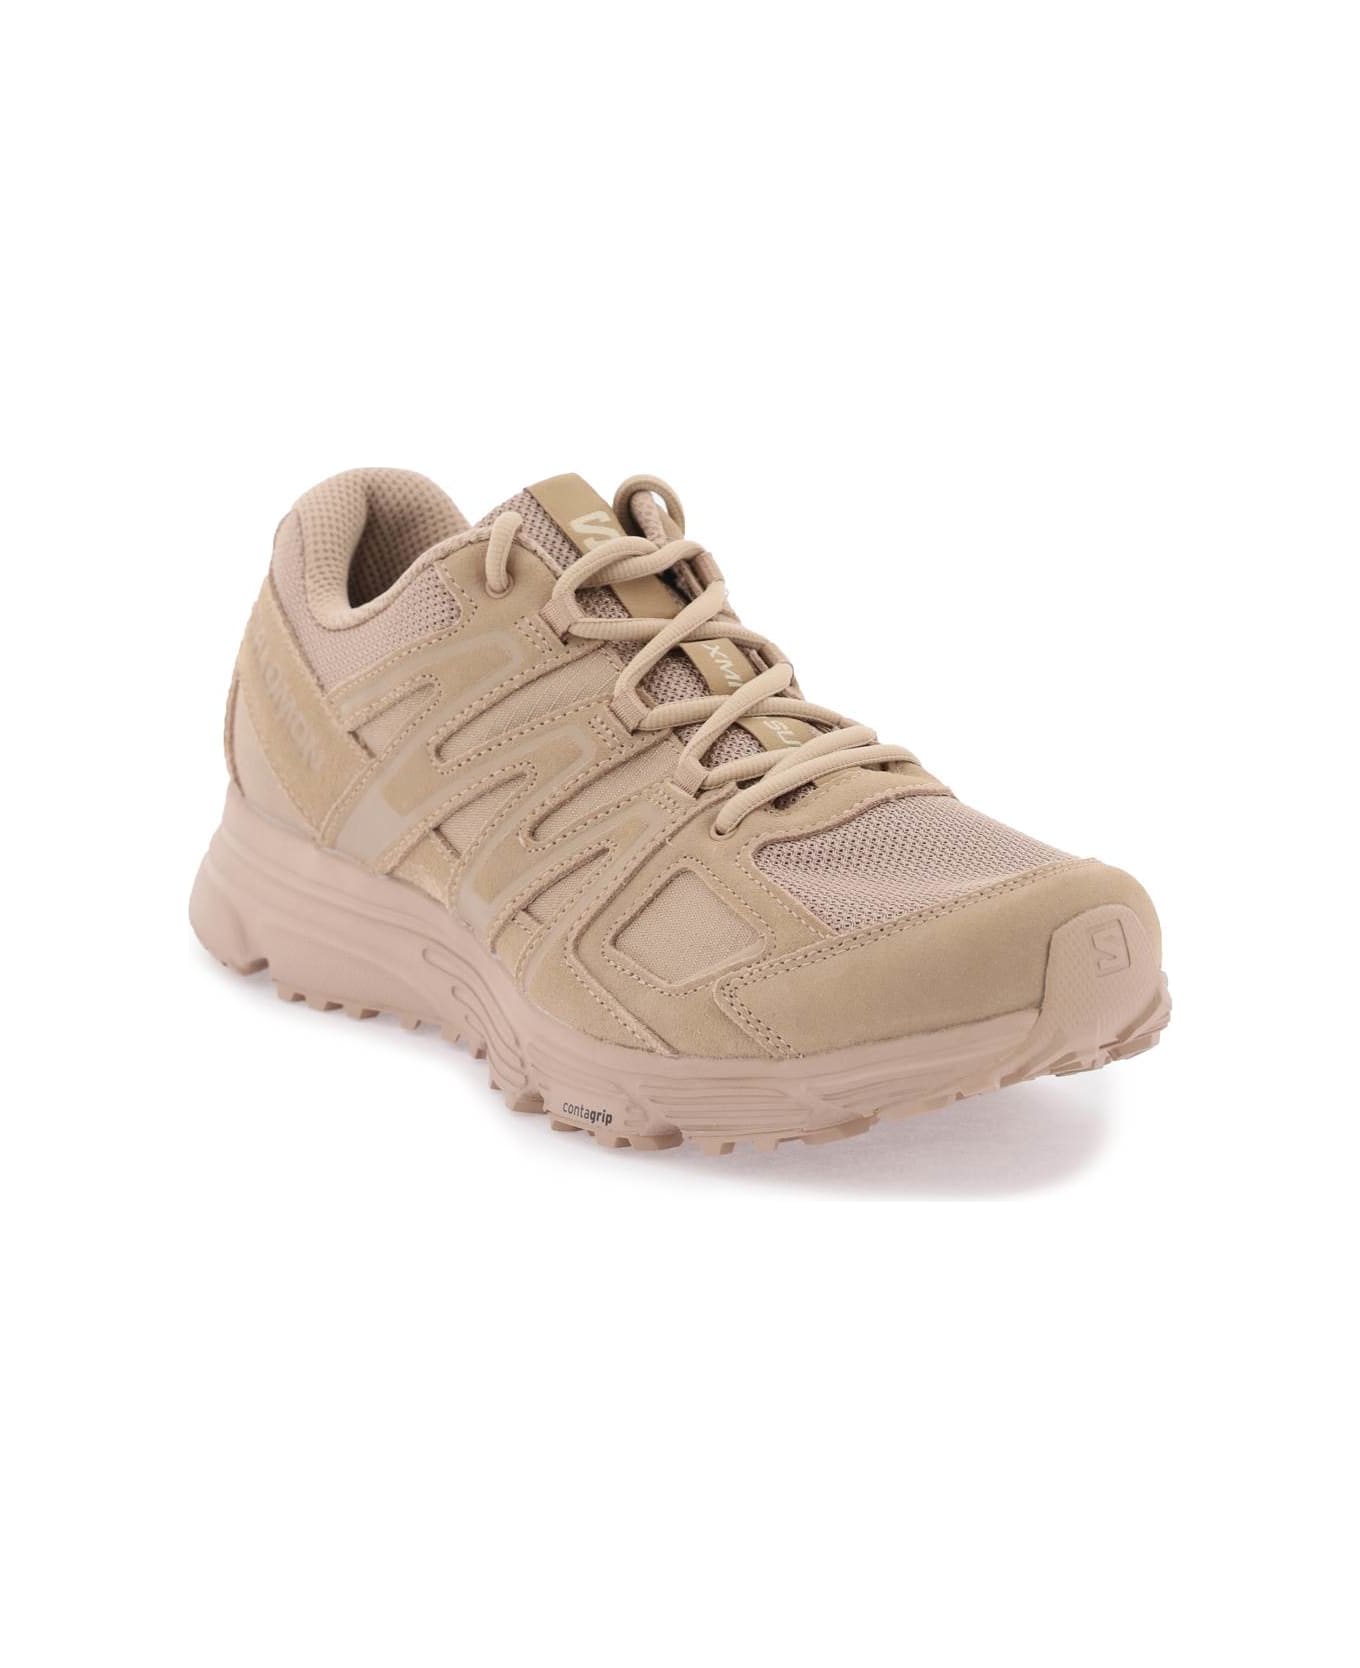 Salomon X-mission 4 Suede Sneakers - NATURAL NATURAL NATURAL (Pink) スニーカー